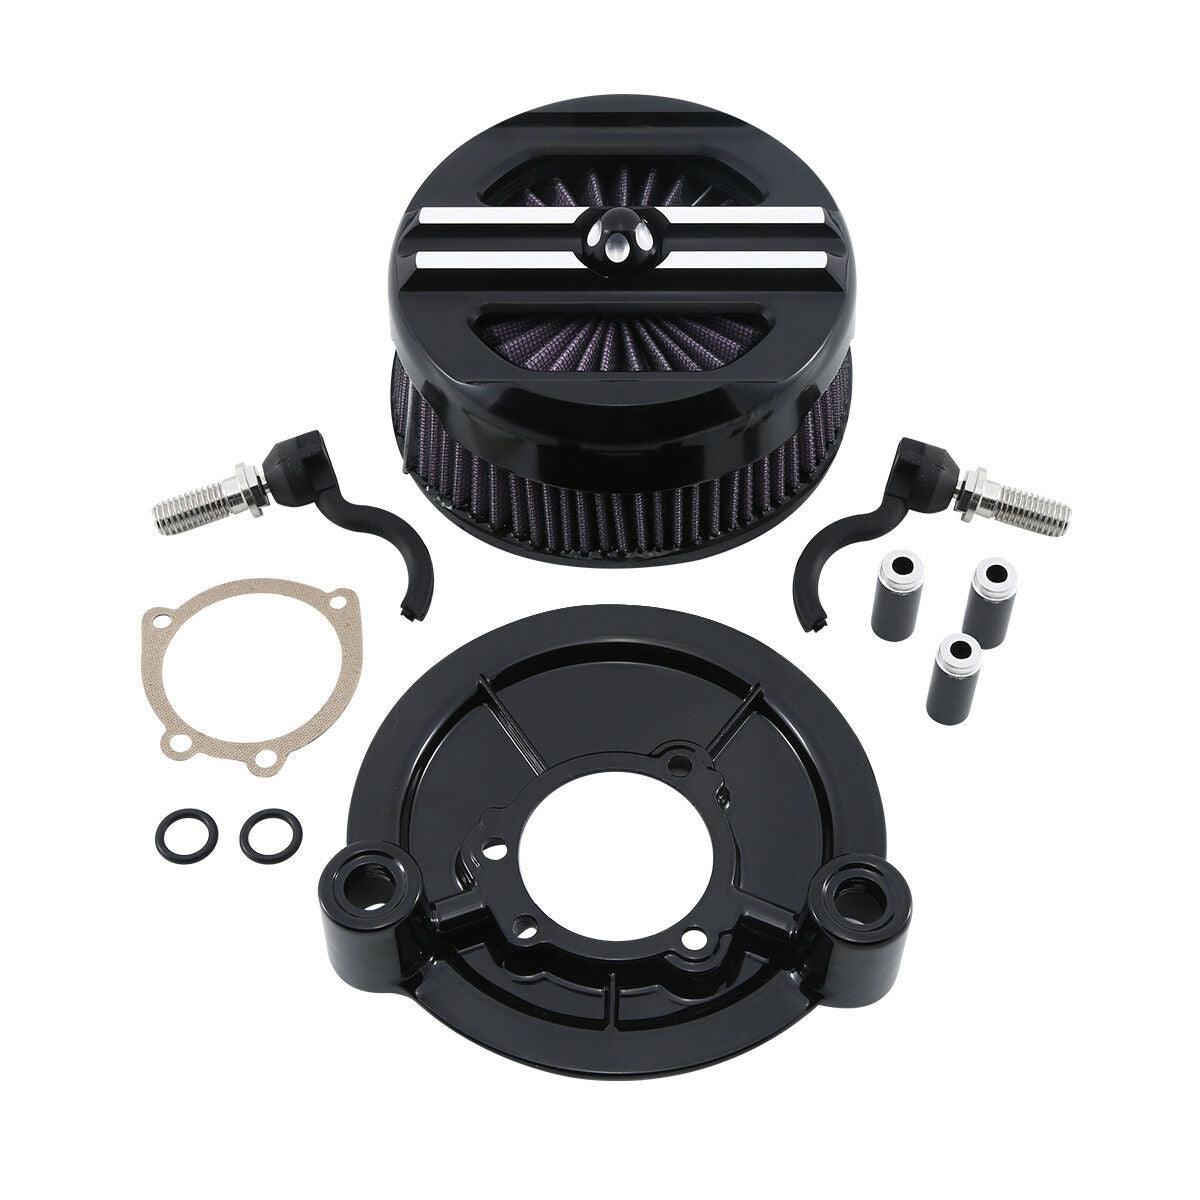 Black Air Cleaner Intake Filter Fit For Harley Sportster 1200 Iron 883 07-later - Moto Life Products